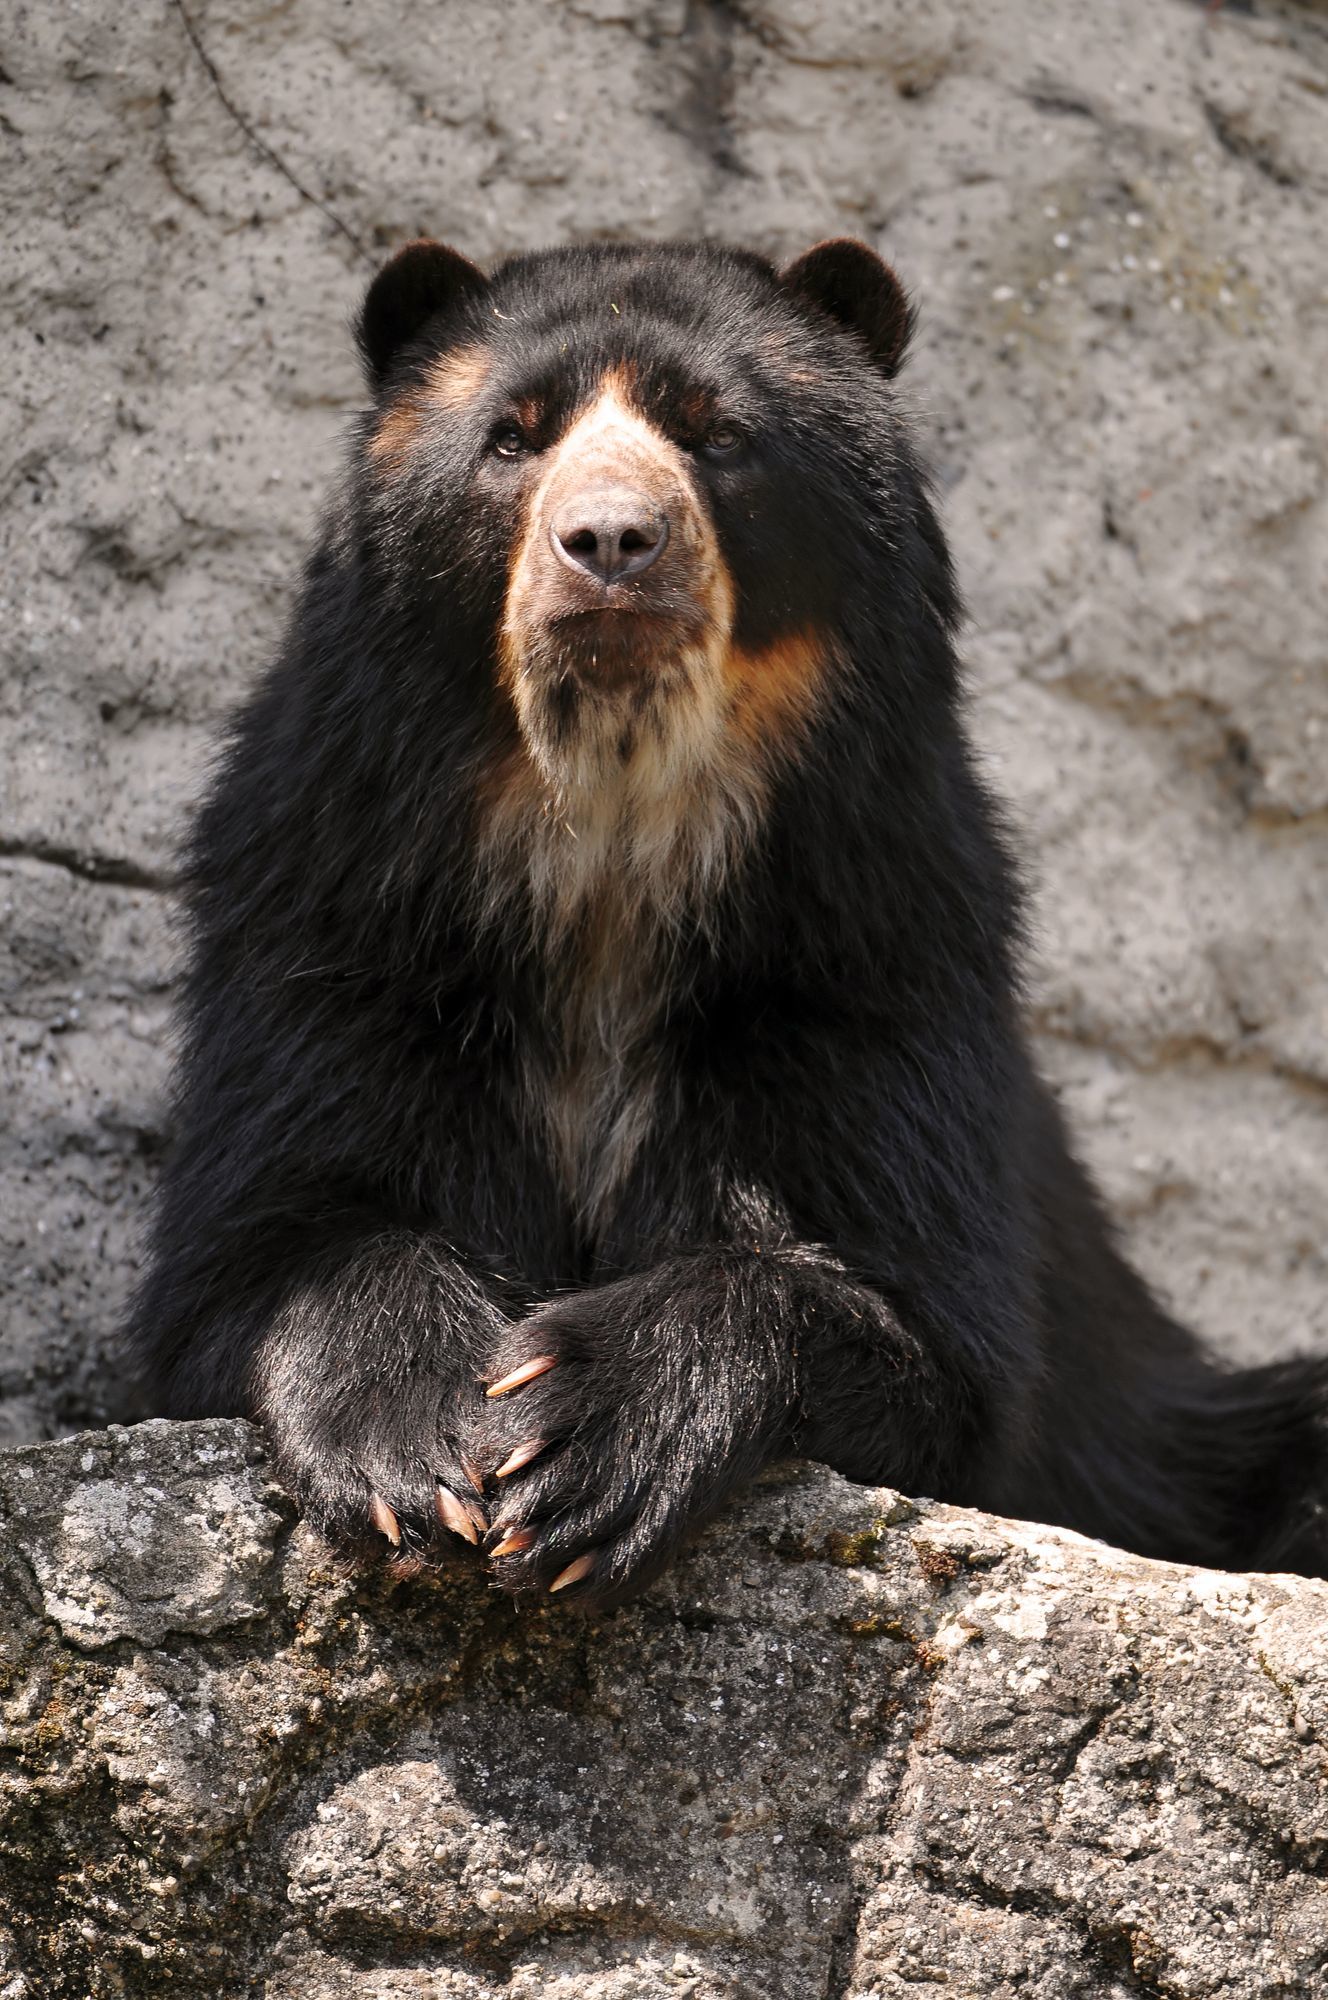 Spectacled (Andean) bear - The Bears, Spectacled bear, Predatory animals, Wild animals, Zoo, The photo, Longpost, Rare view